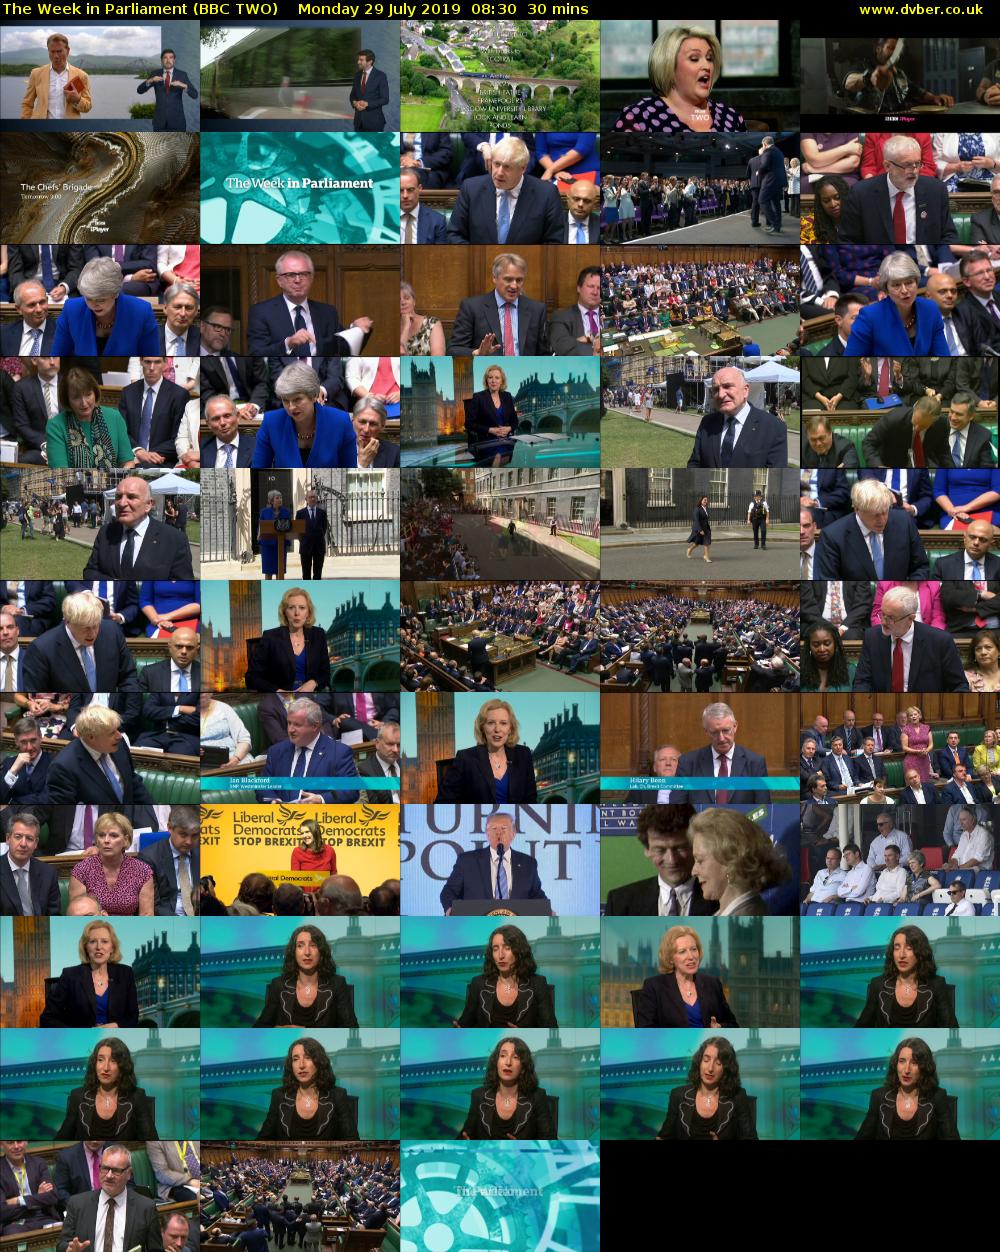 The Week in Parliament (BBC TWO) Monday 29 July 2019 08:30 - 09:00